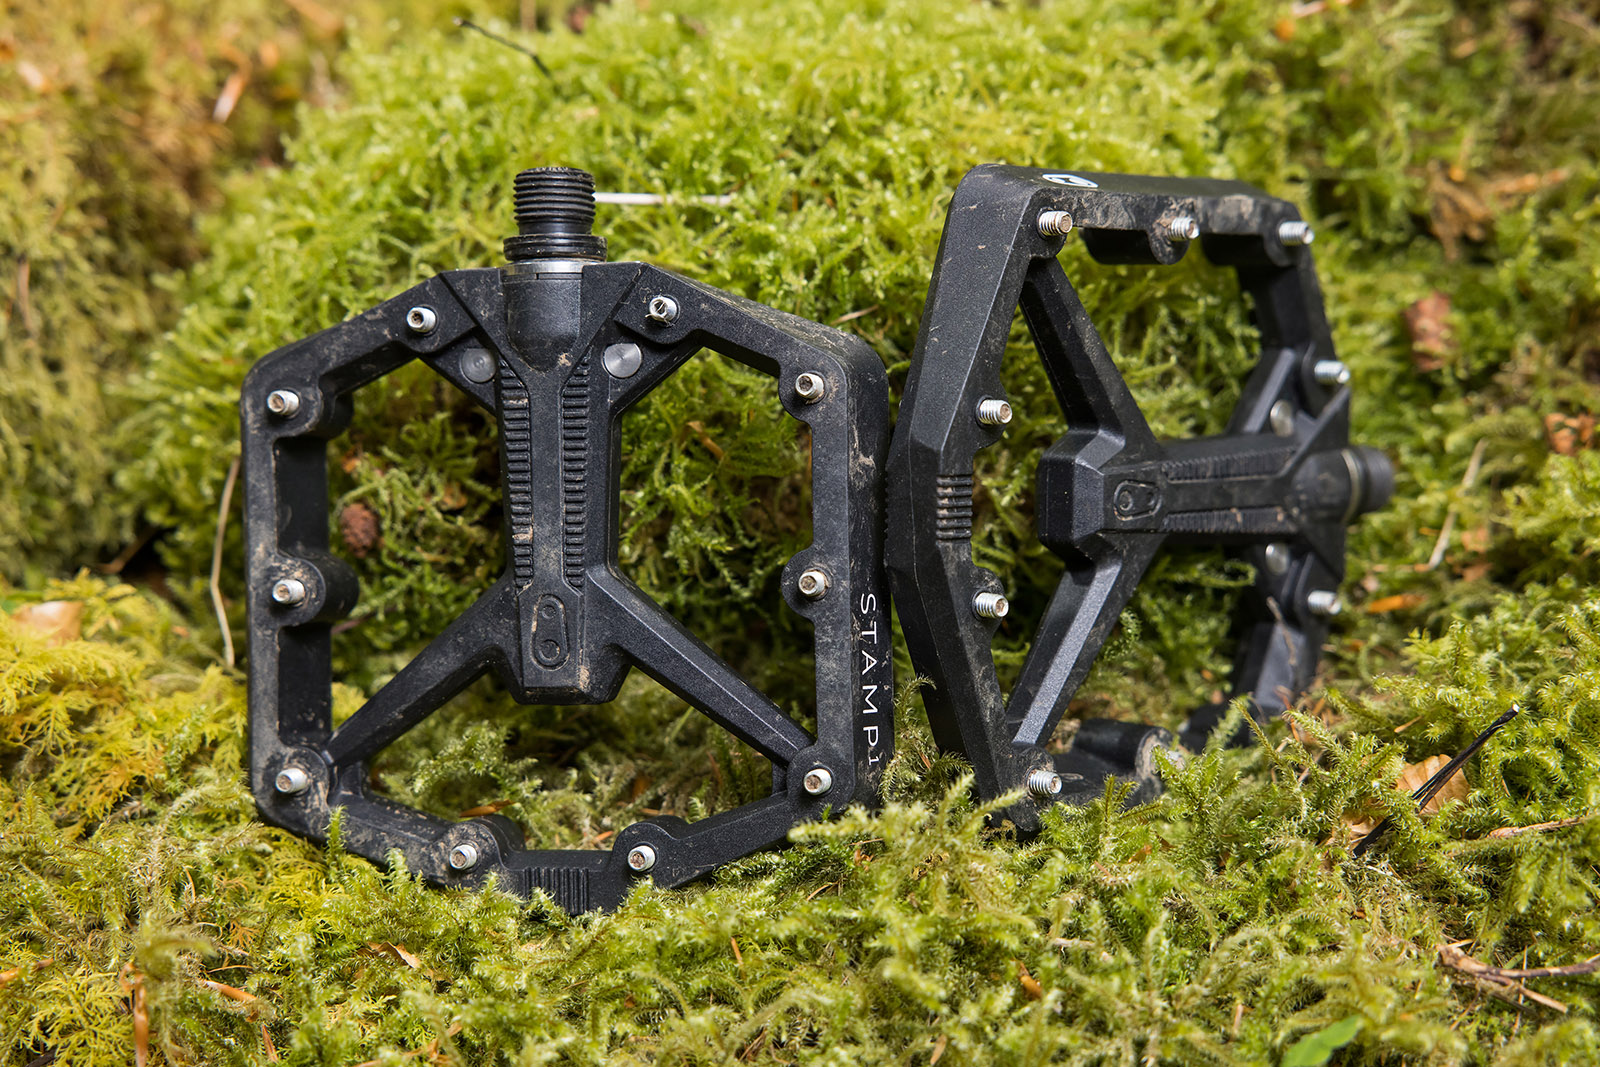 Crankbrothers Stamp 1 V2 flat pedals review - Pedals - Components